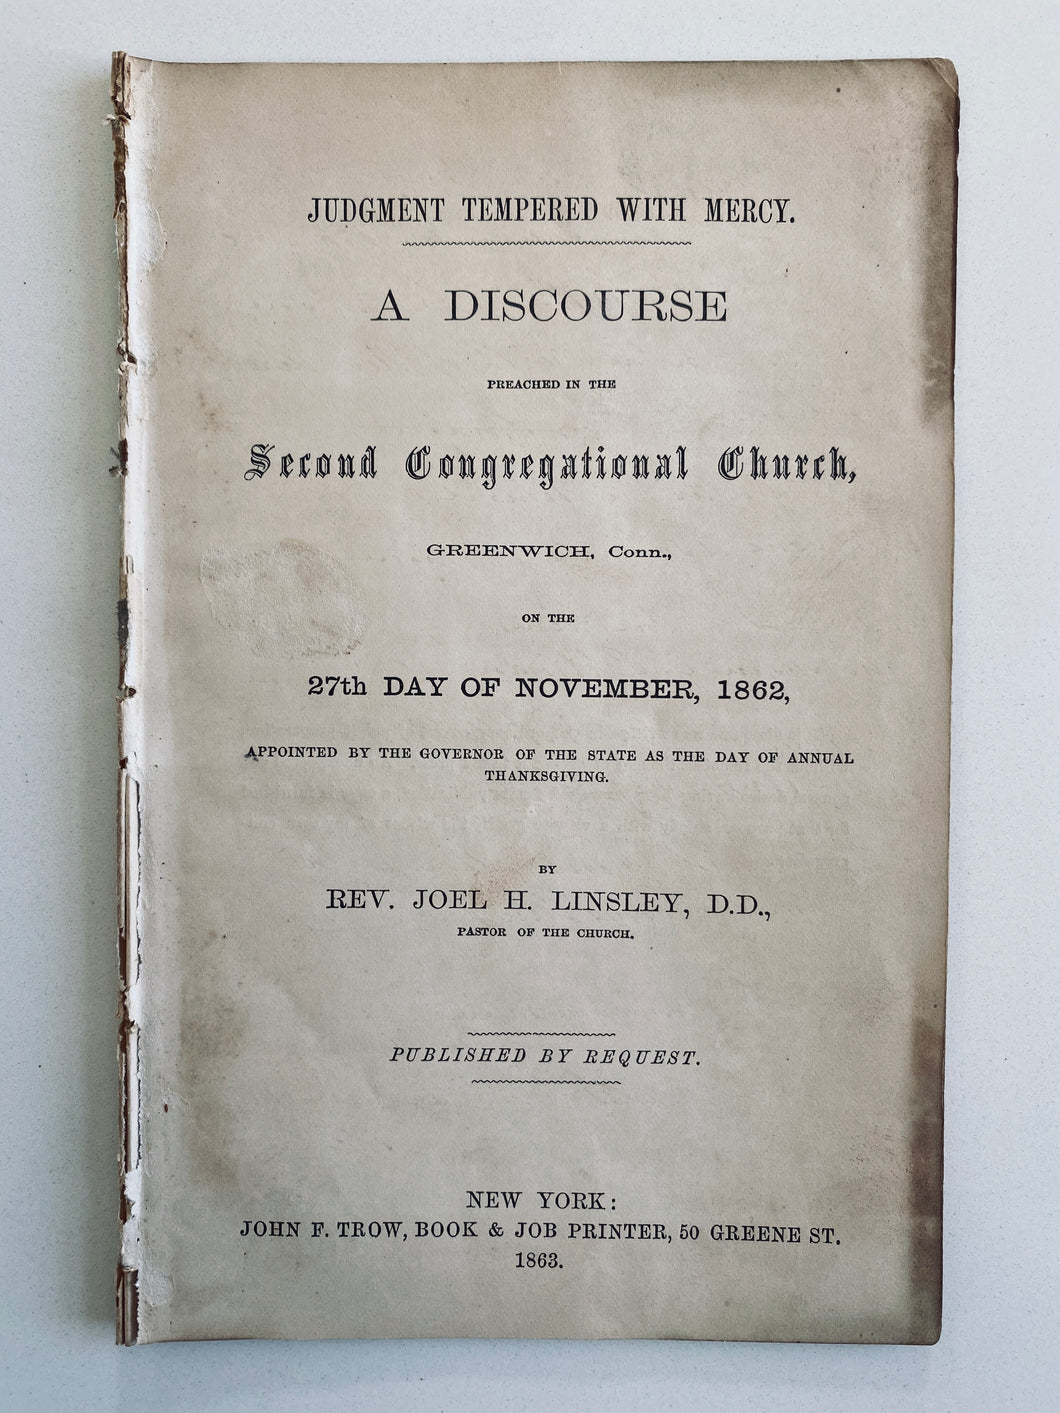 1863 JOEL H LINSLEY. Judgment Tempered with Mercy. A Thanksgiving Sermon During the Civil War.